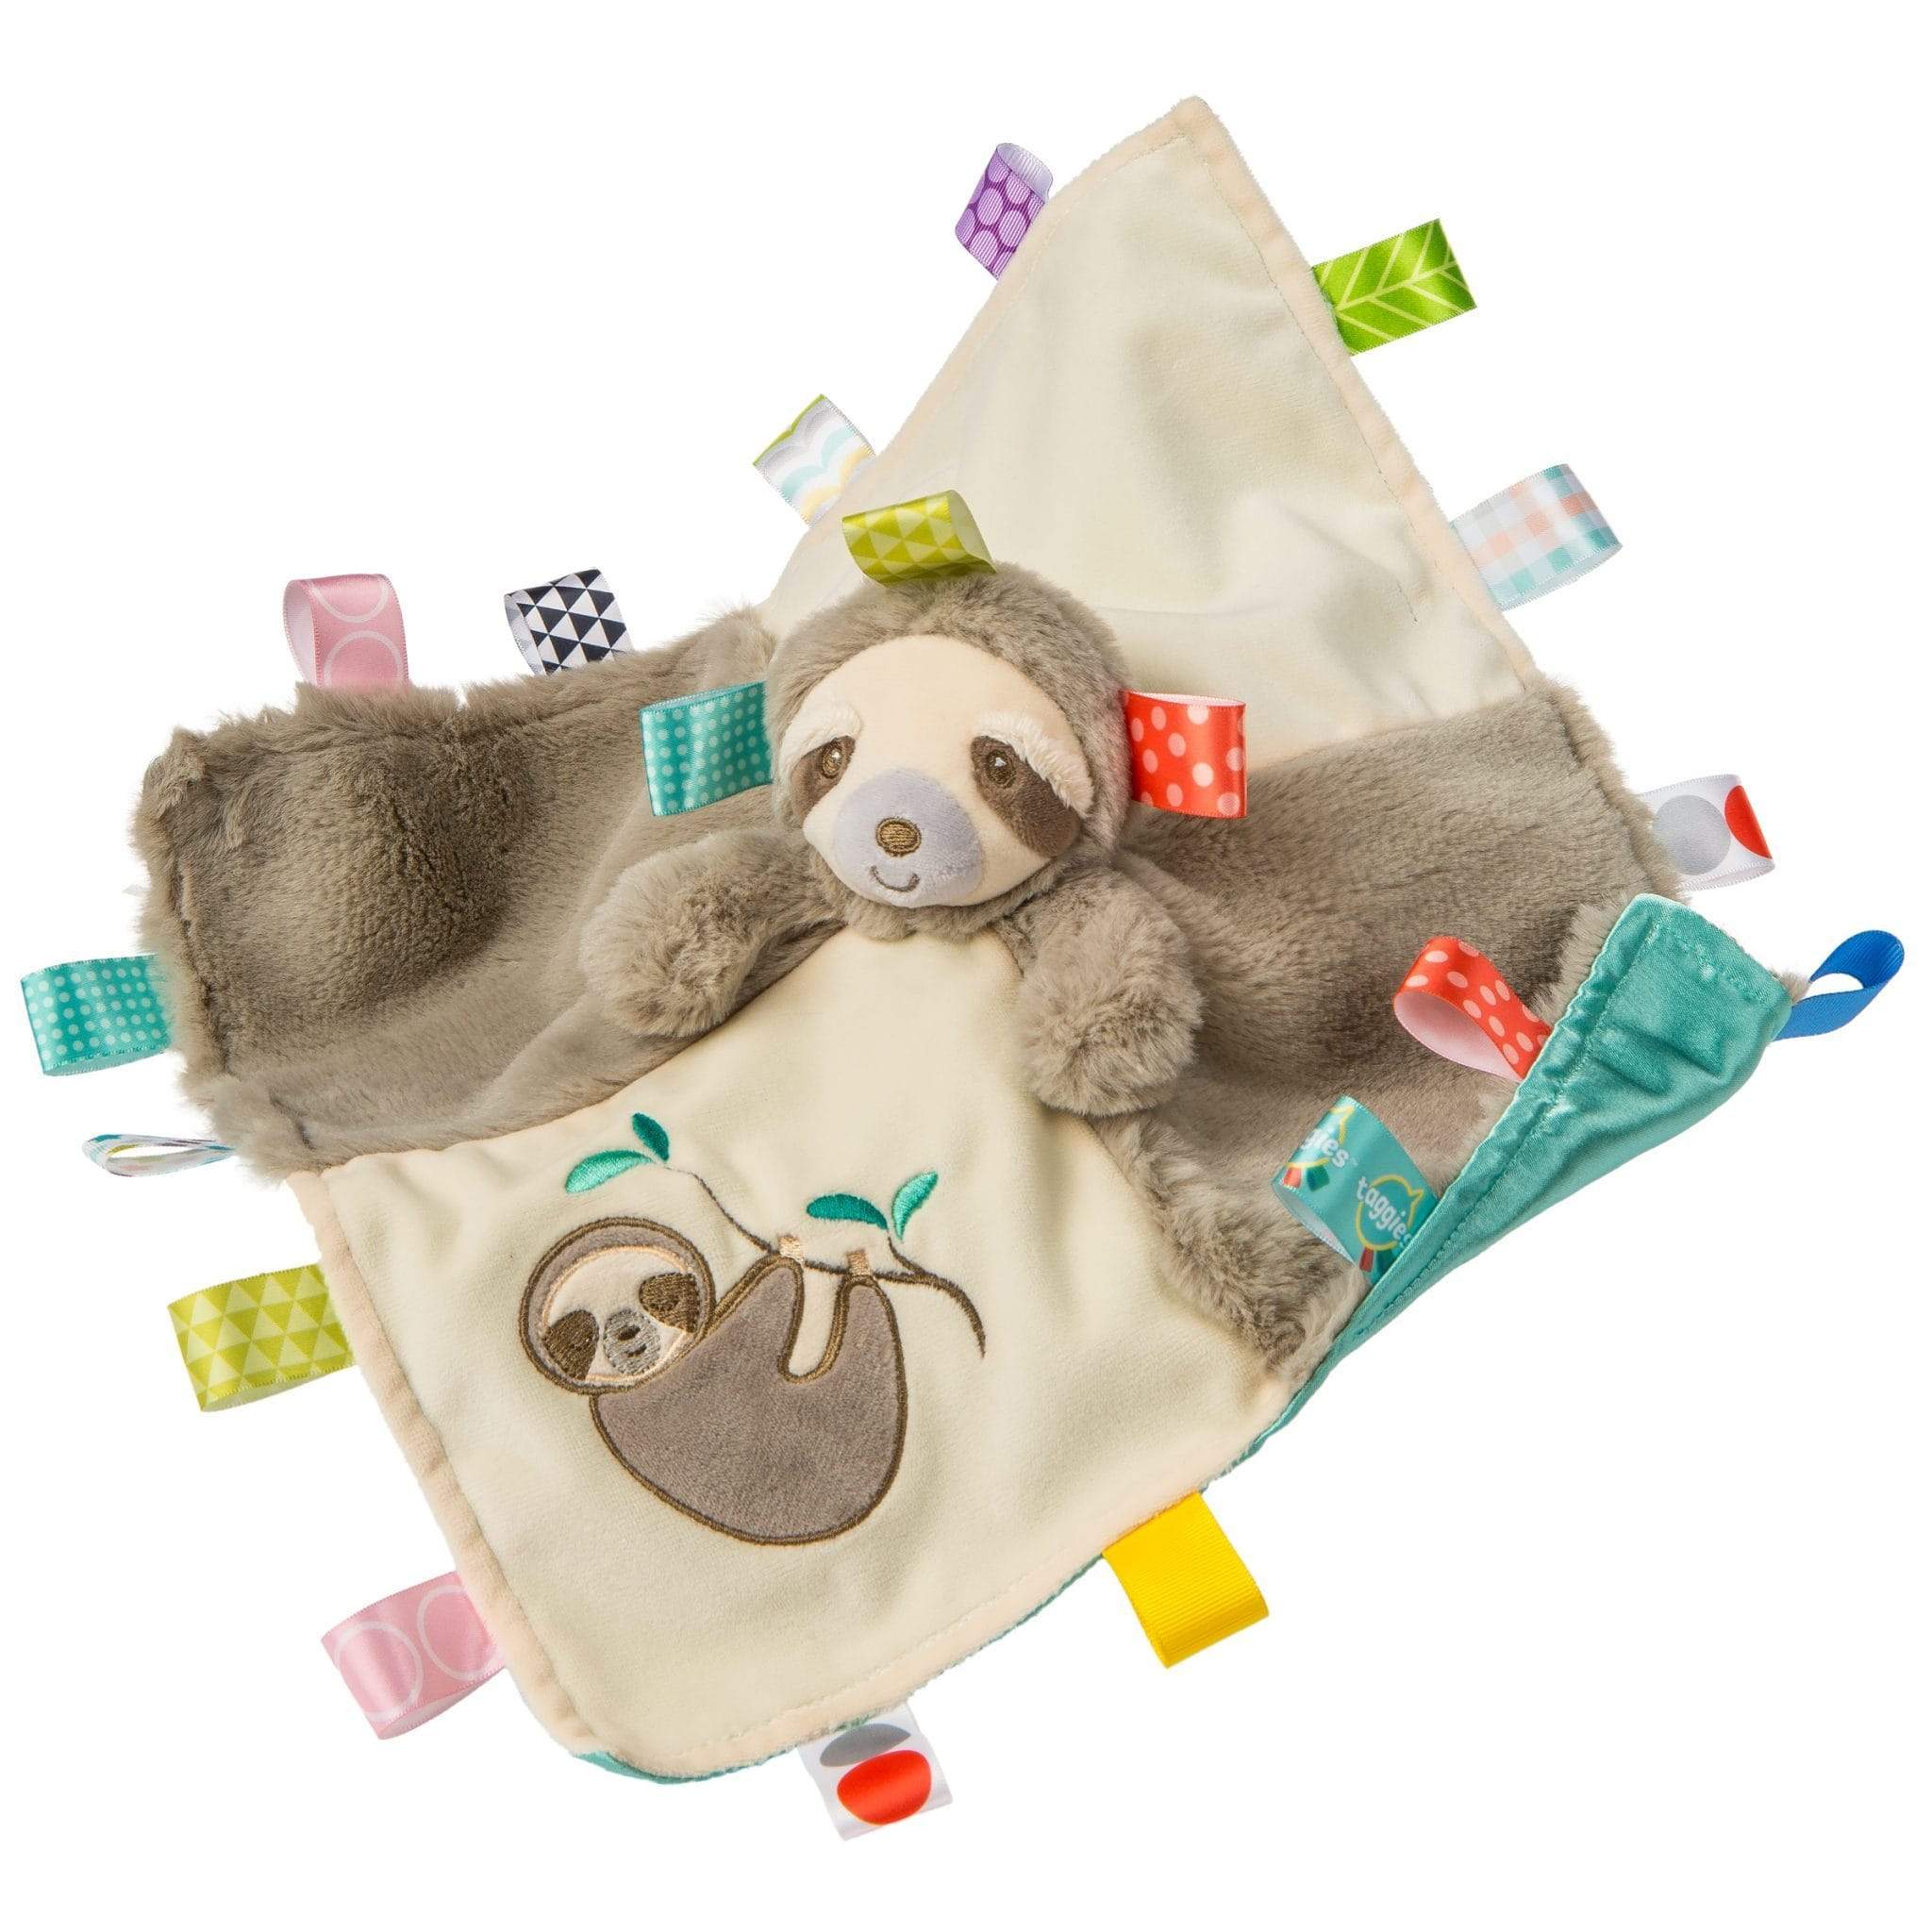 Sloth Taggie Blanket Comforter by Mary Meyer